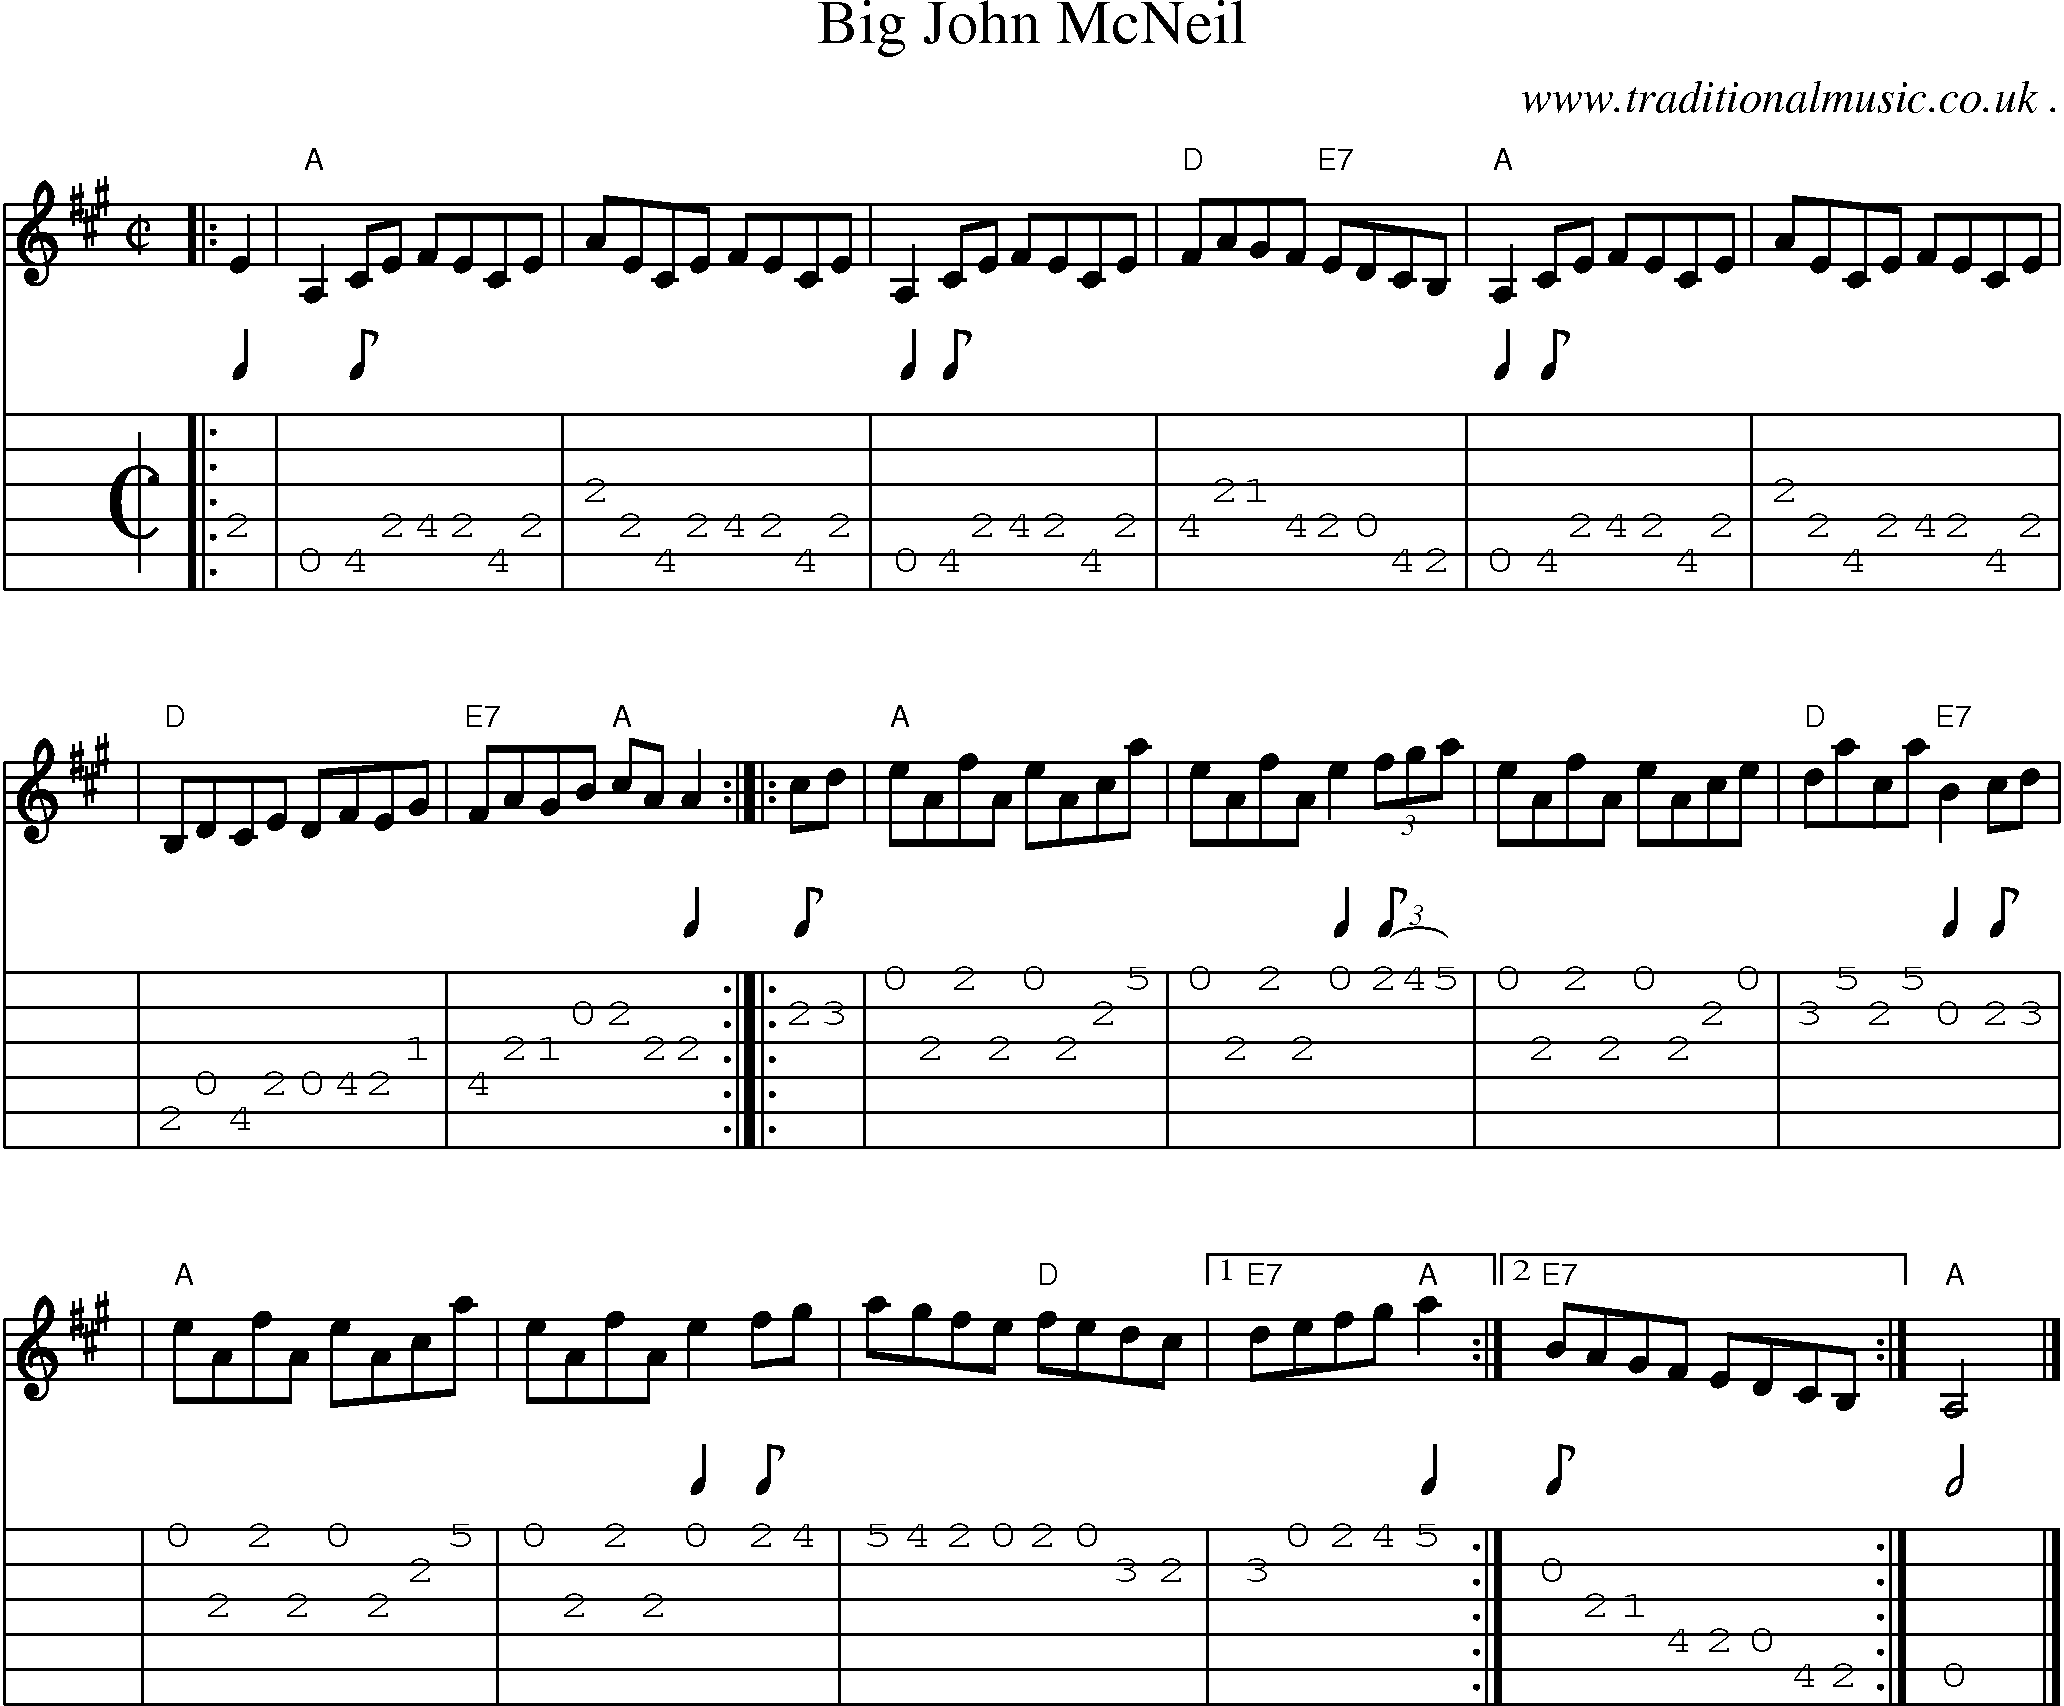 Sheet-music  score, Chords and Guitar Tabs for Big John Mcneil